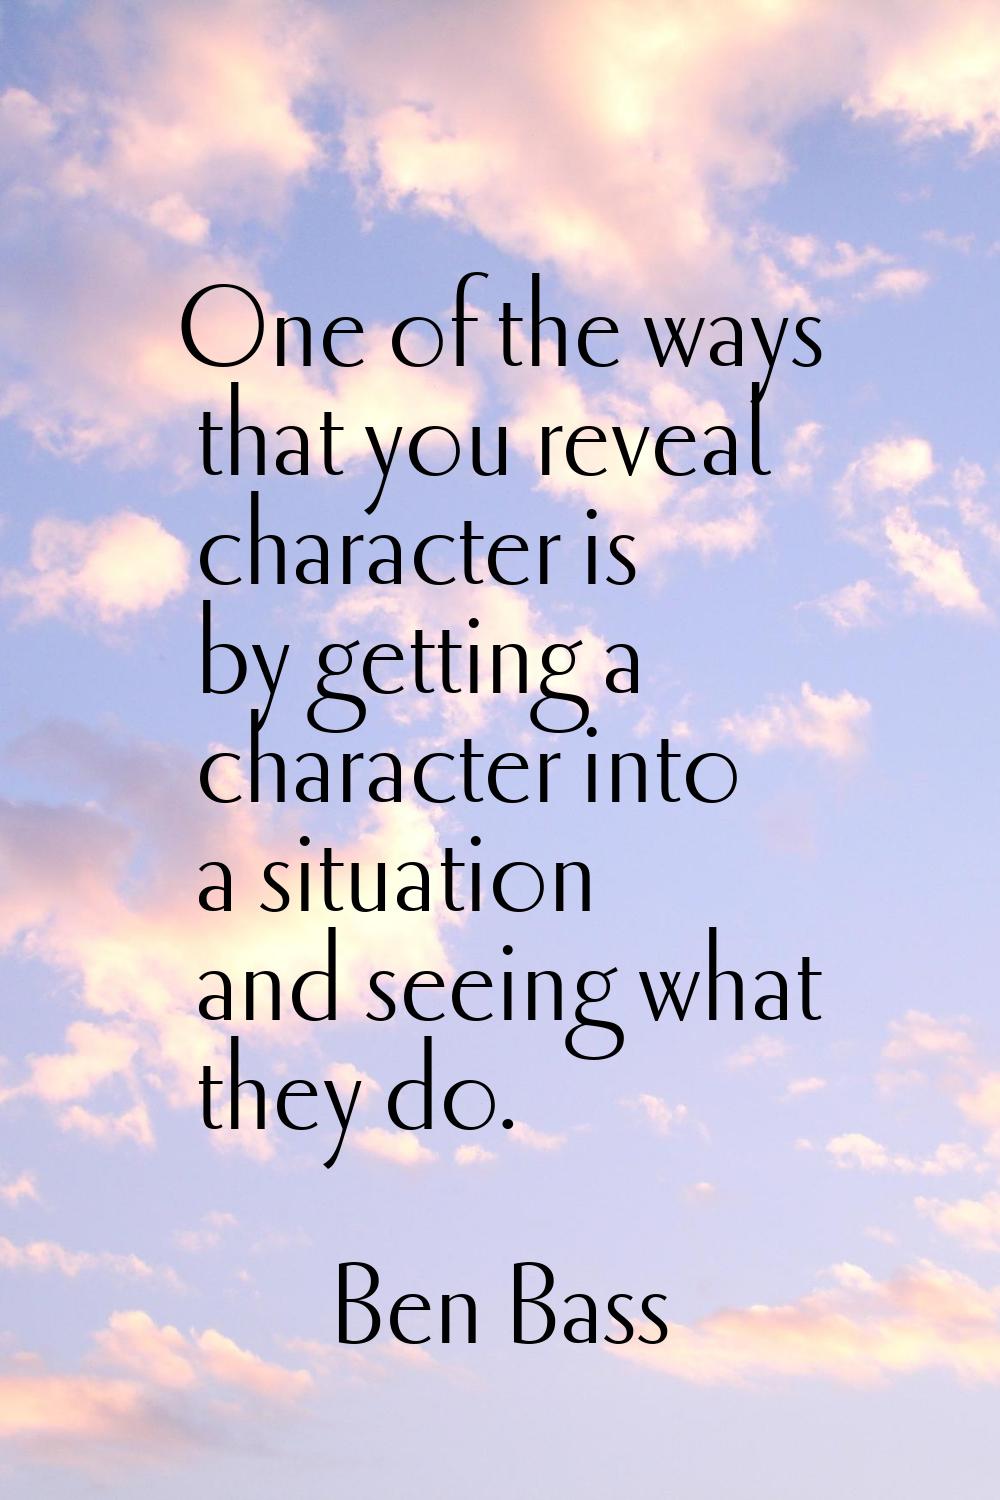 One of the ways that you reveal character is by getting a character into a situation and seeing wha